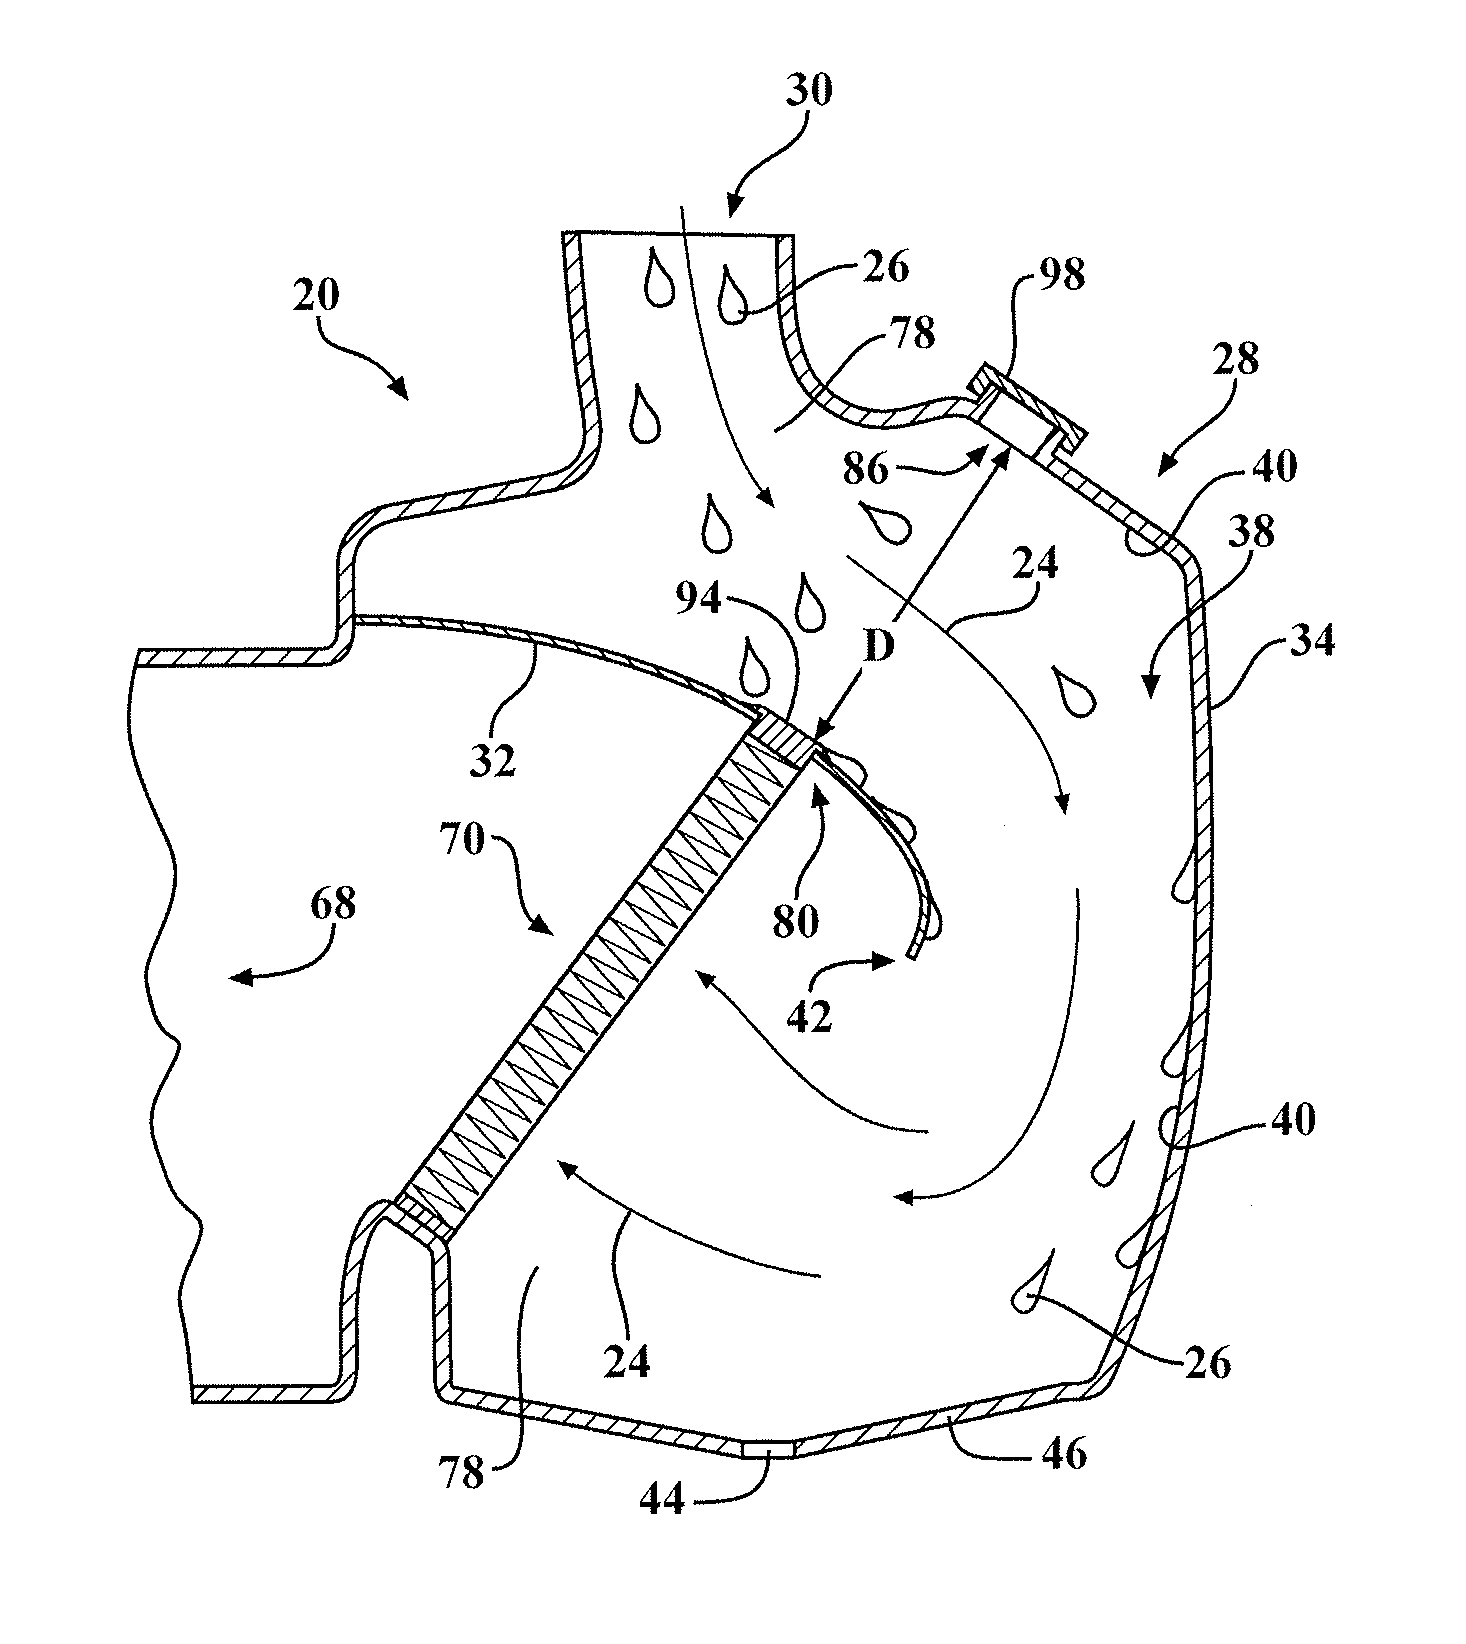 Water separator having a filter assembly